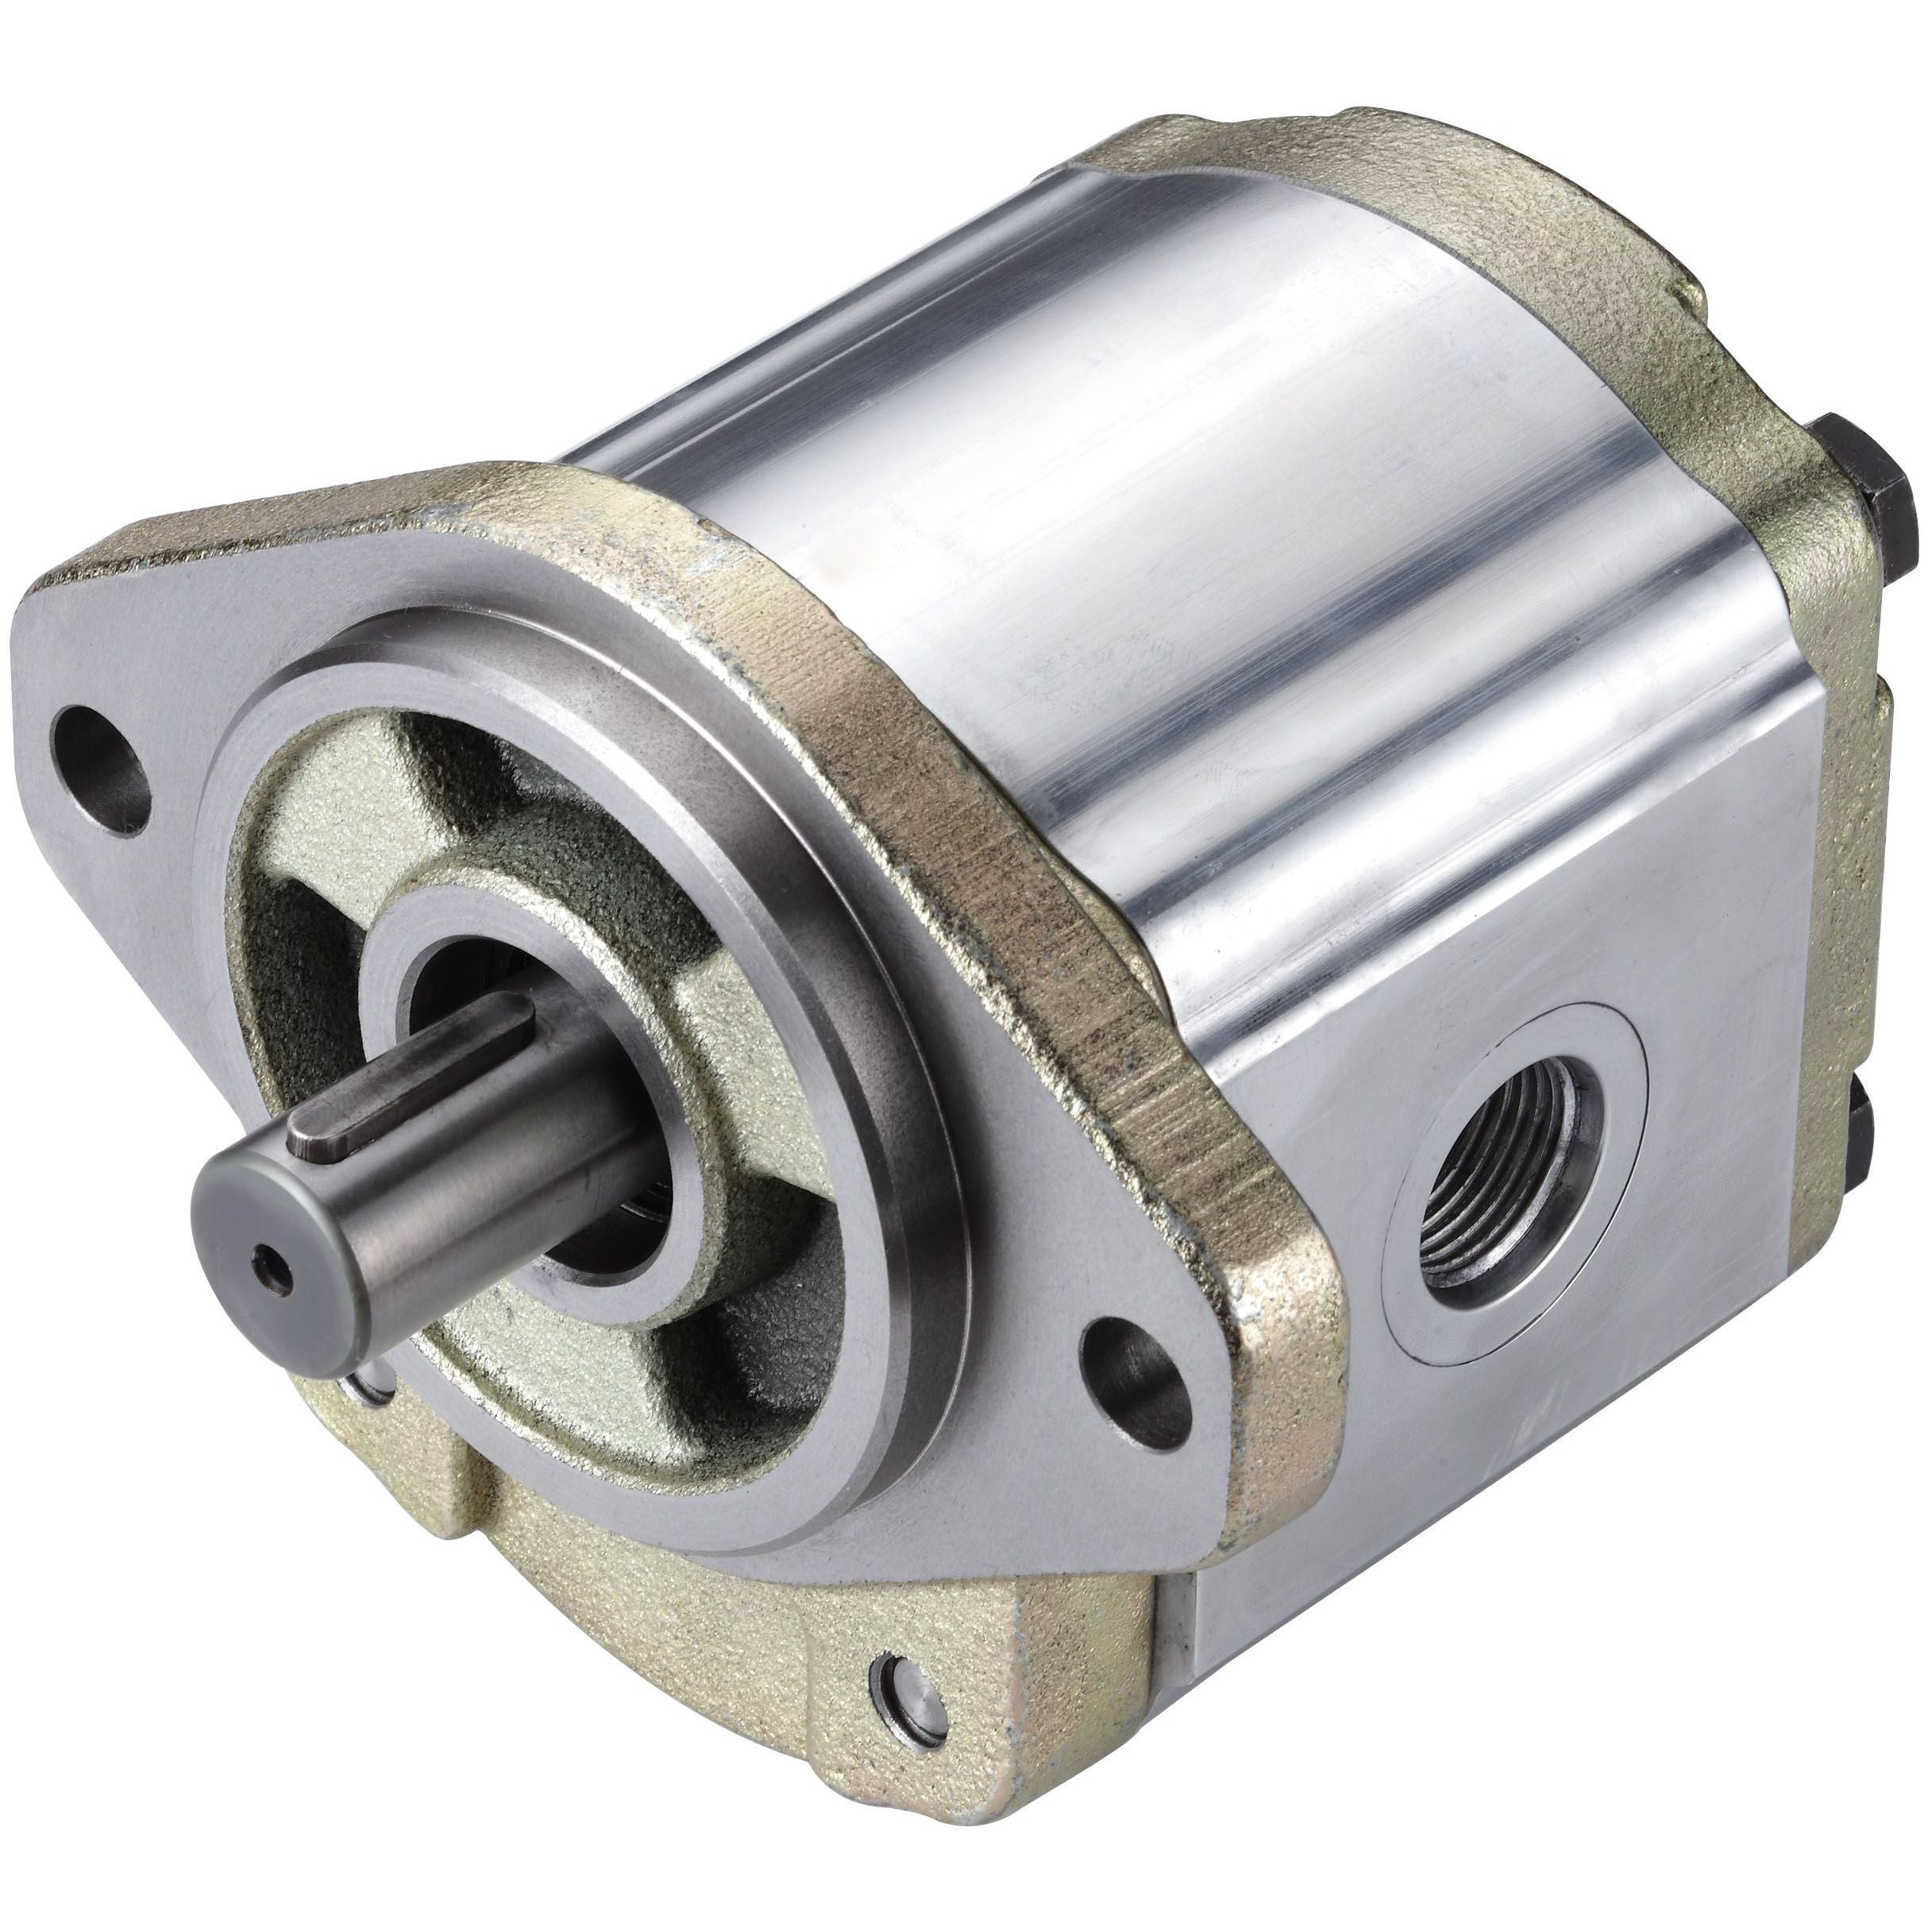 3GB8ZU138R : Honor Gear Pump, CW Rotation, 38cc (2.32in3), 18.07 GPM, 3500psi, 3000 RPM, #16 SAE (1") In, #12 SAE (3/4") Out, Splined Shaft 13-Tooth, 16/32 Pitch, SAE B 2-Bolt Mount